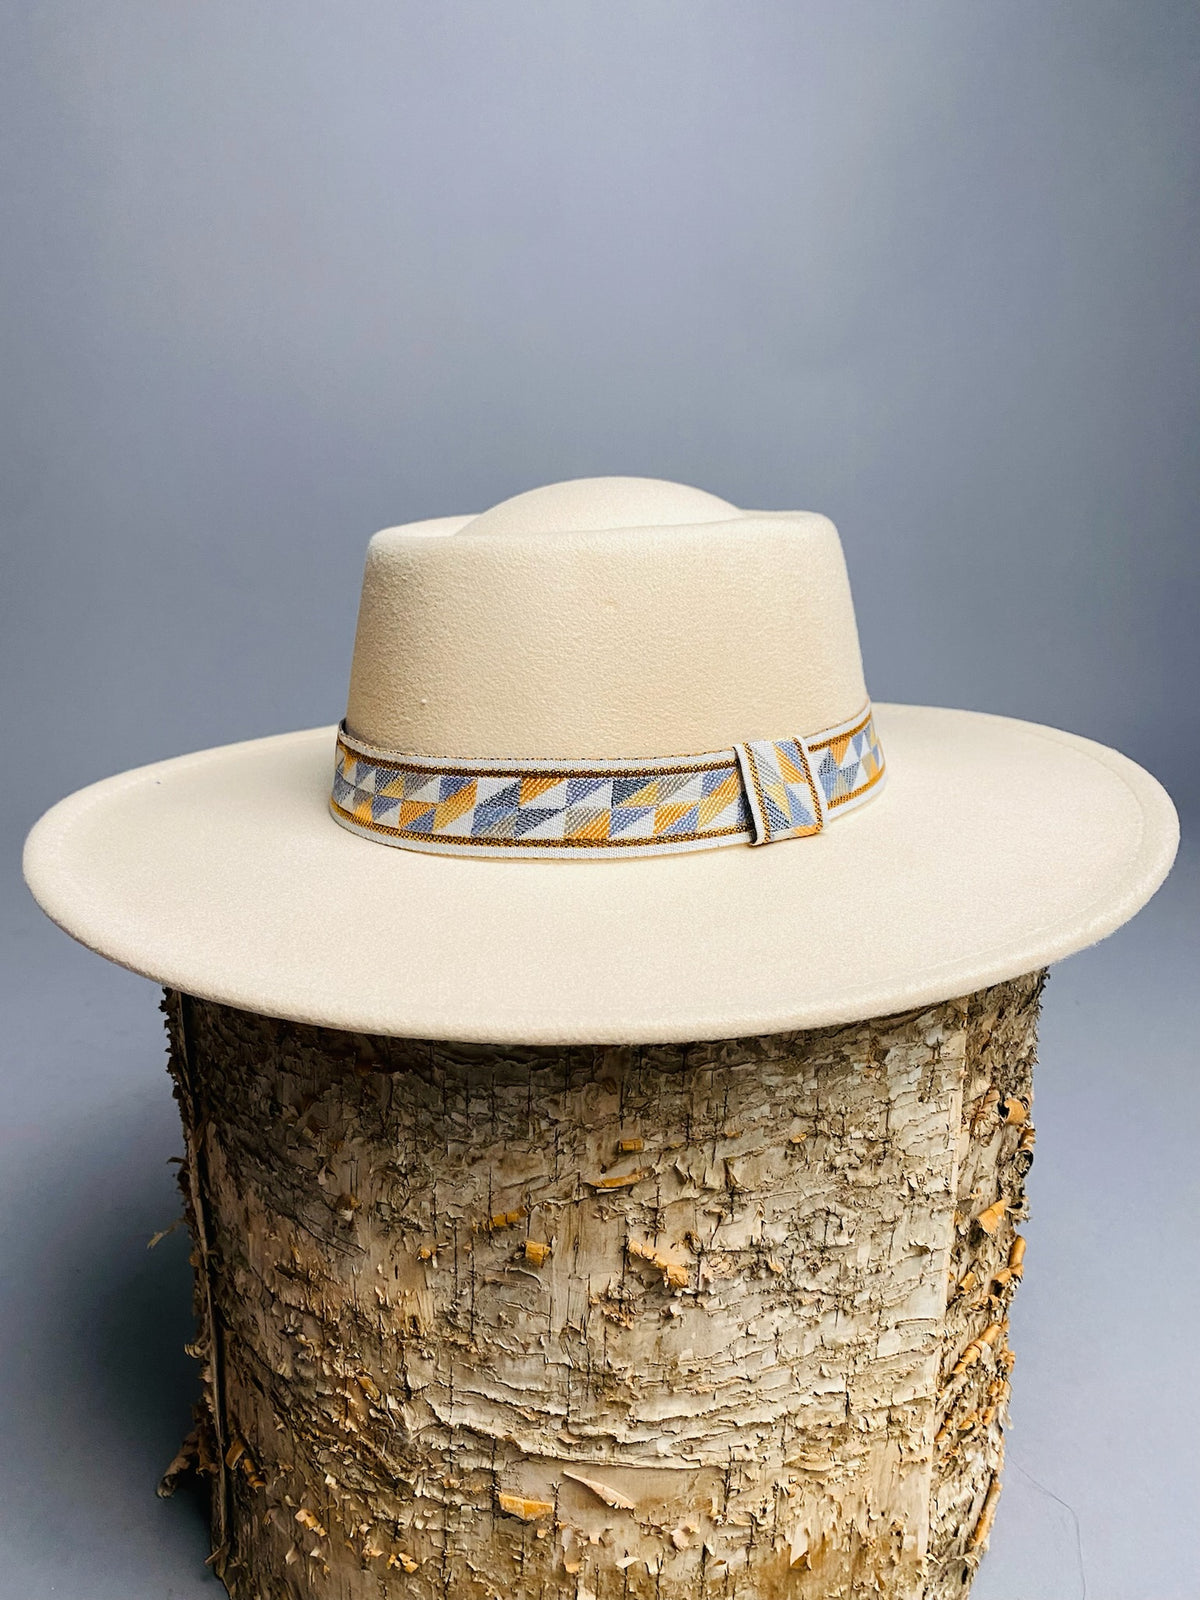 Wide brim printed trim hat sand - Trendy Hats at Lush Fashion Lounge Boutique in Oklahoma City